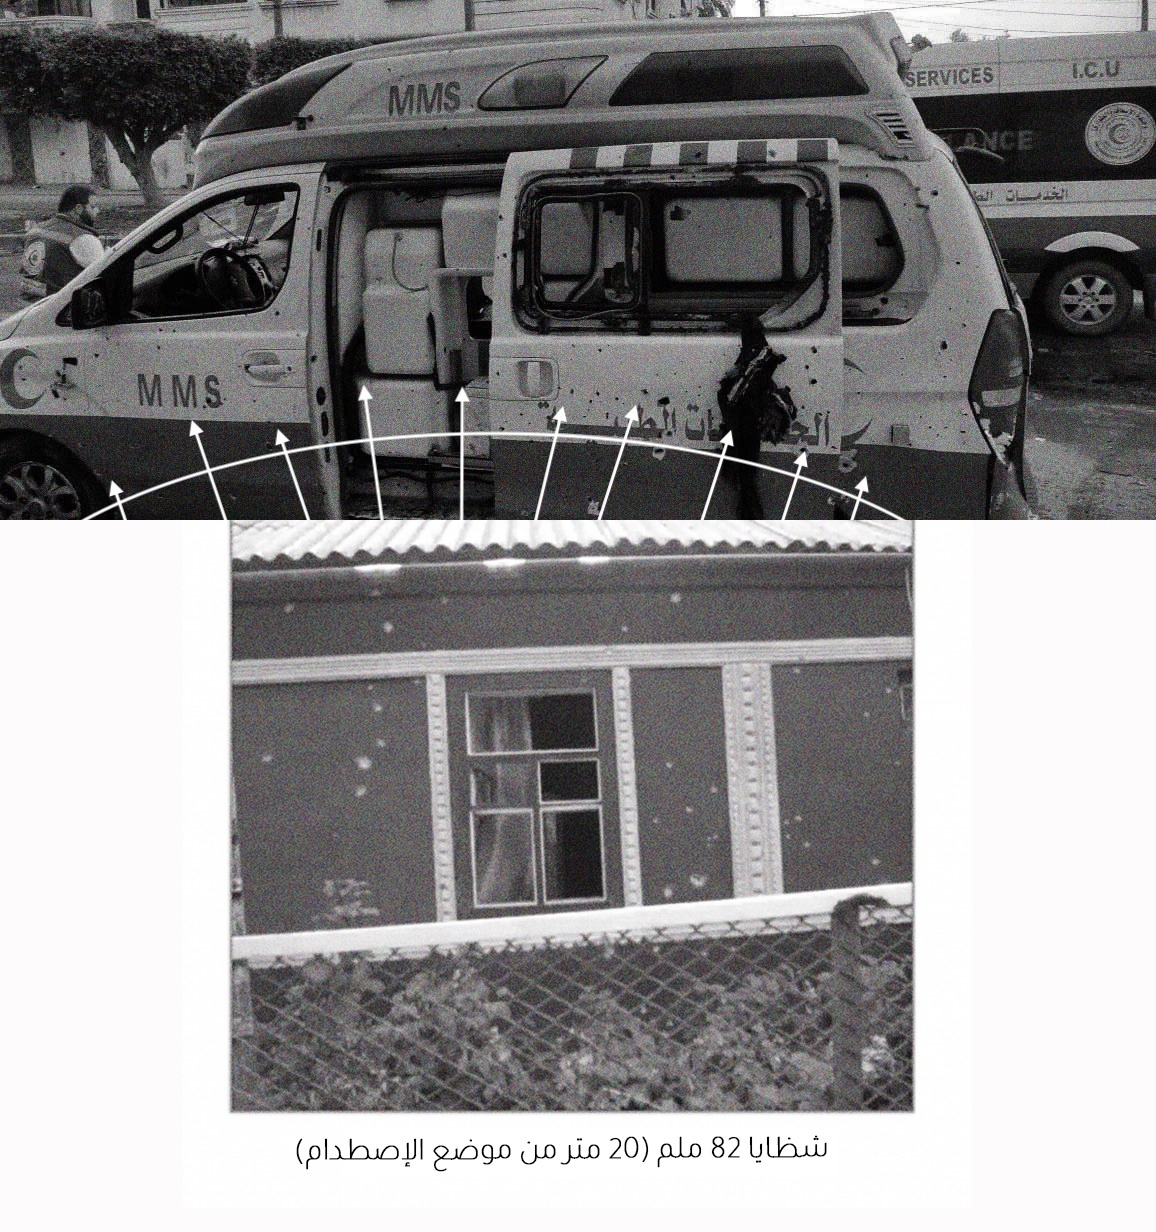 Photos of an ambulance and of a window showing mortar shell fragment dispersion.